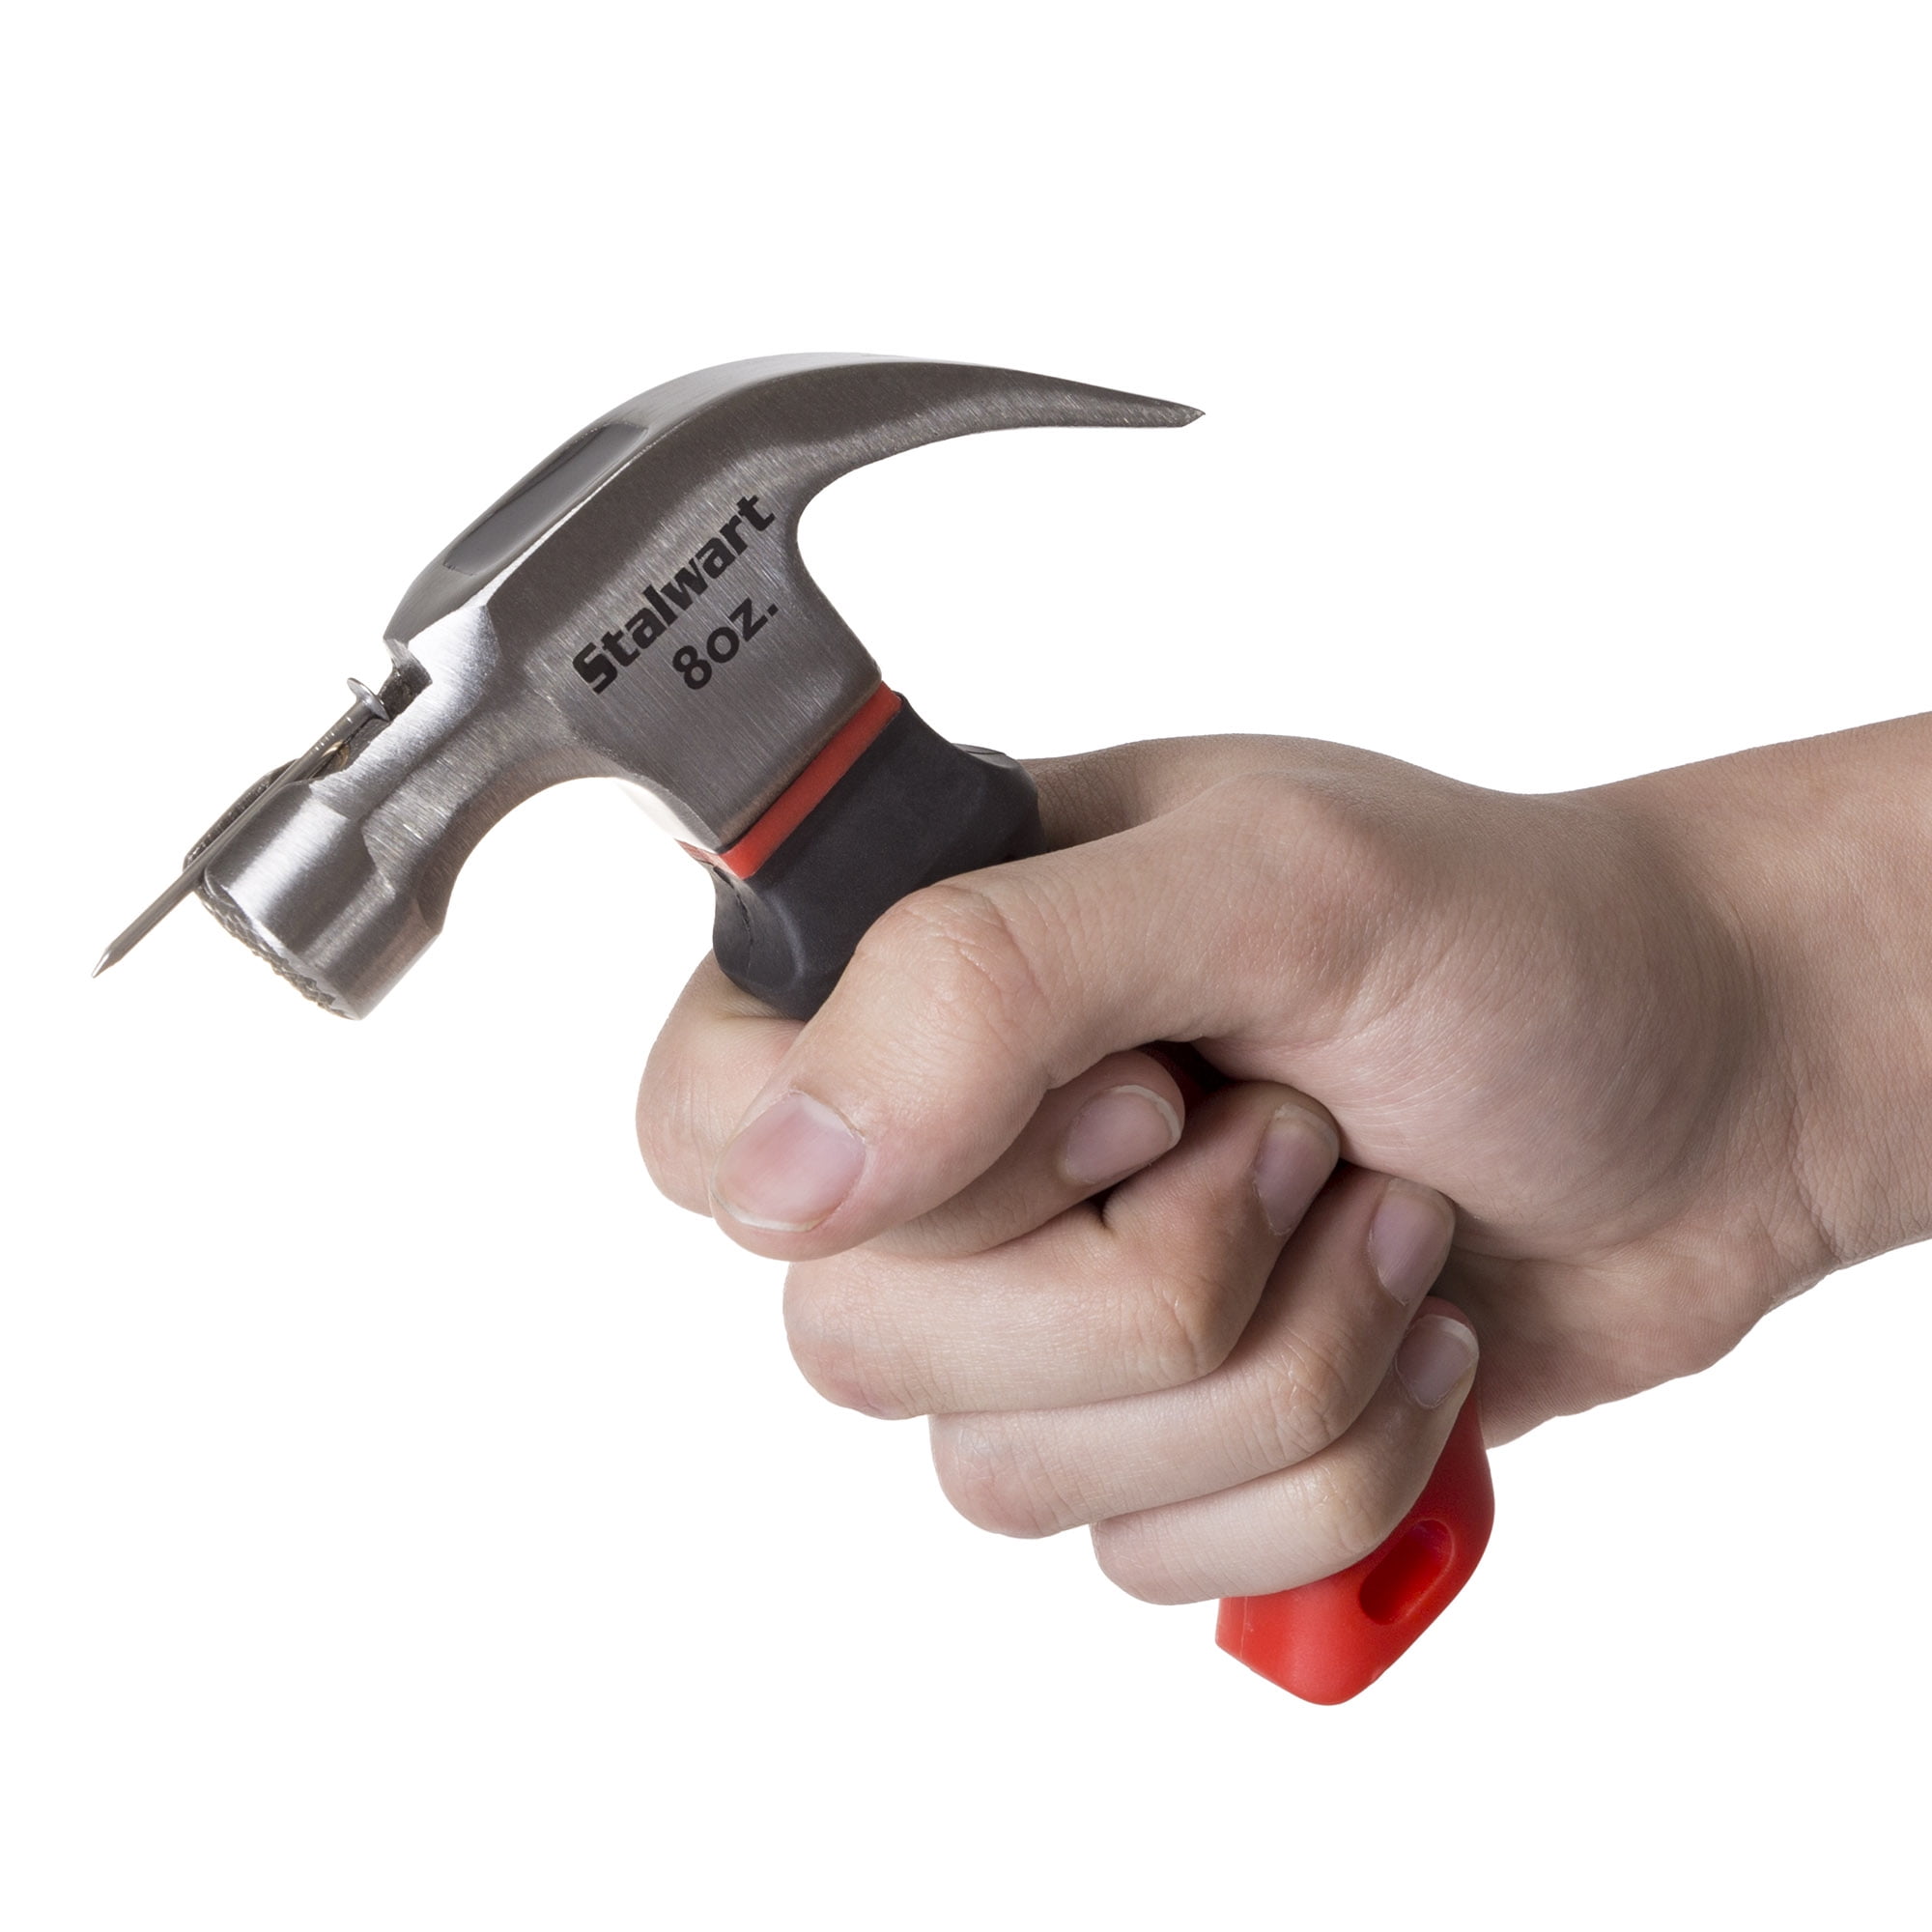 Claw Hammer 8oz/ 400g with Fibreglass Handle New. 